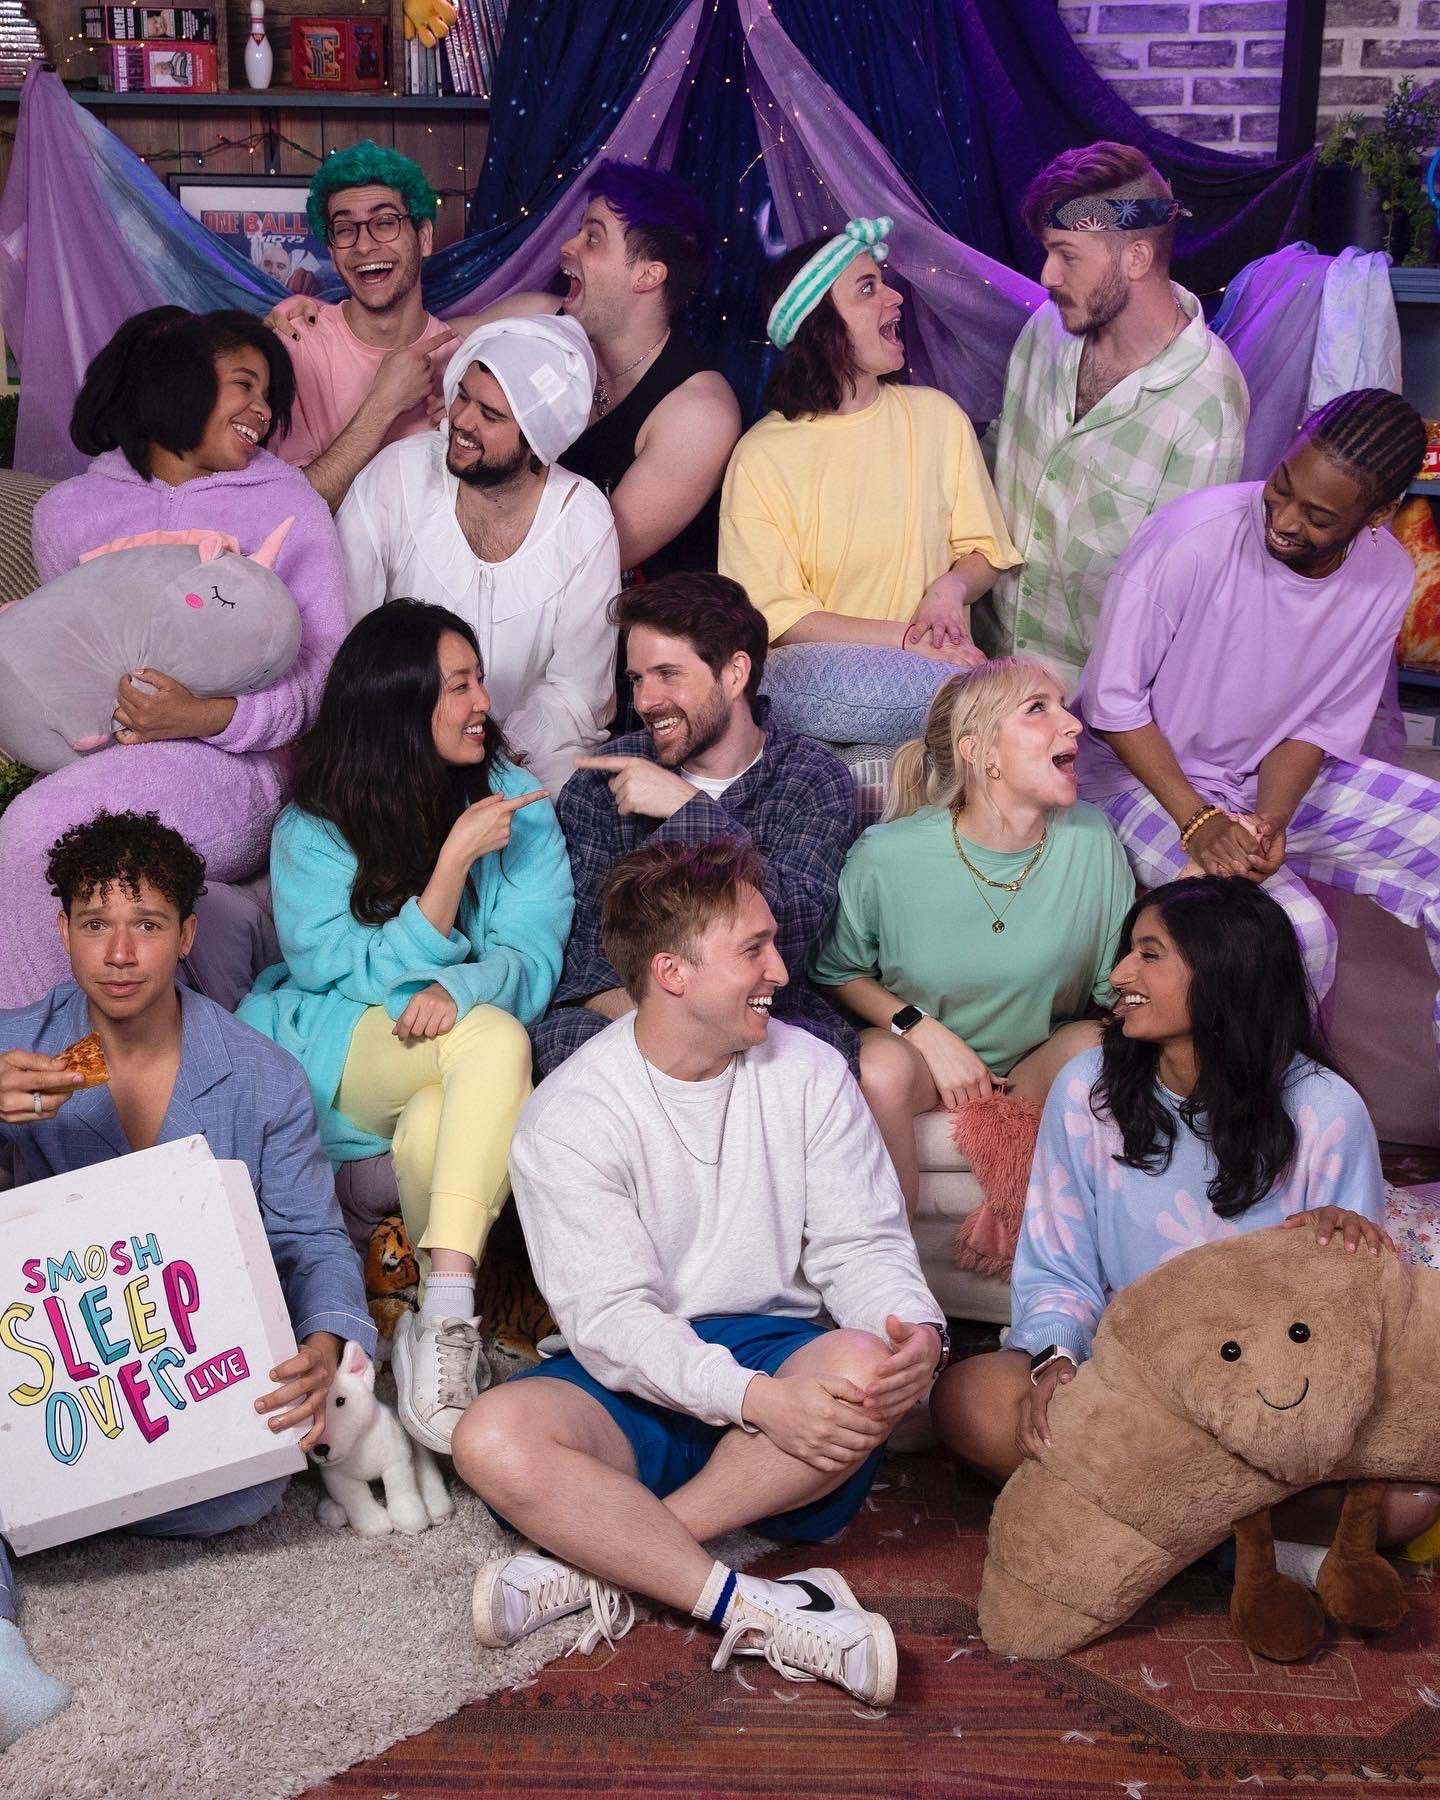 an image of the main smosh cast. they are all wearing pajamas and interacting with each other in a silly fashion. in the bottom left, one cast member is holding a pizza box that reads 'Smosh Sleep Over Live' on the back.